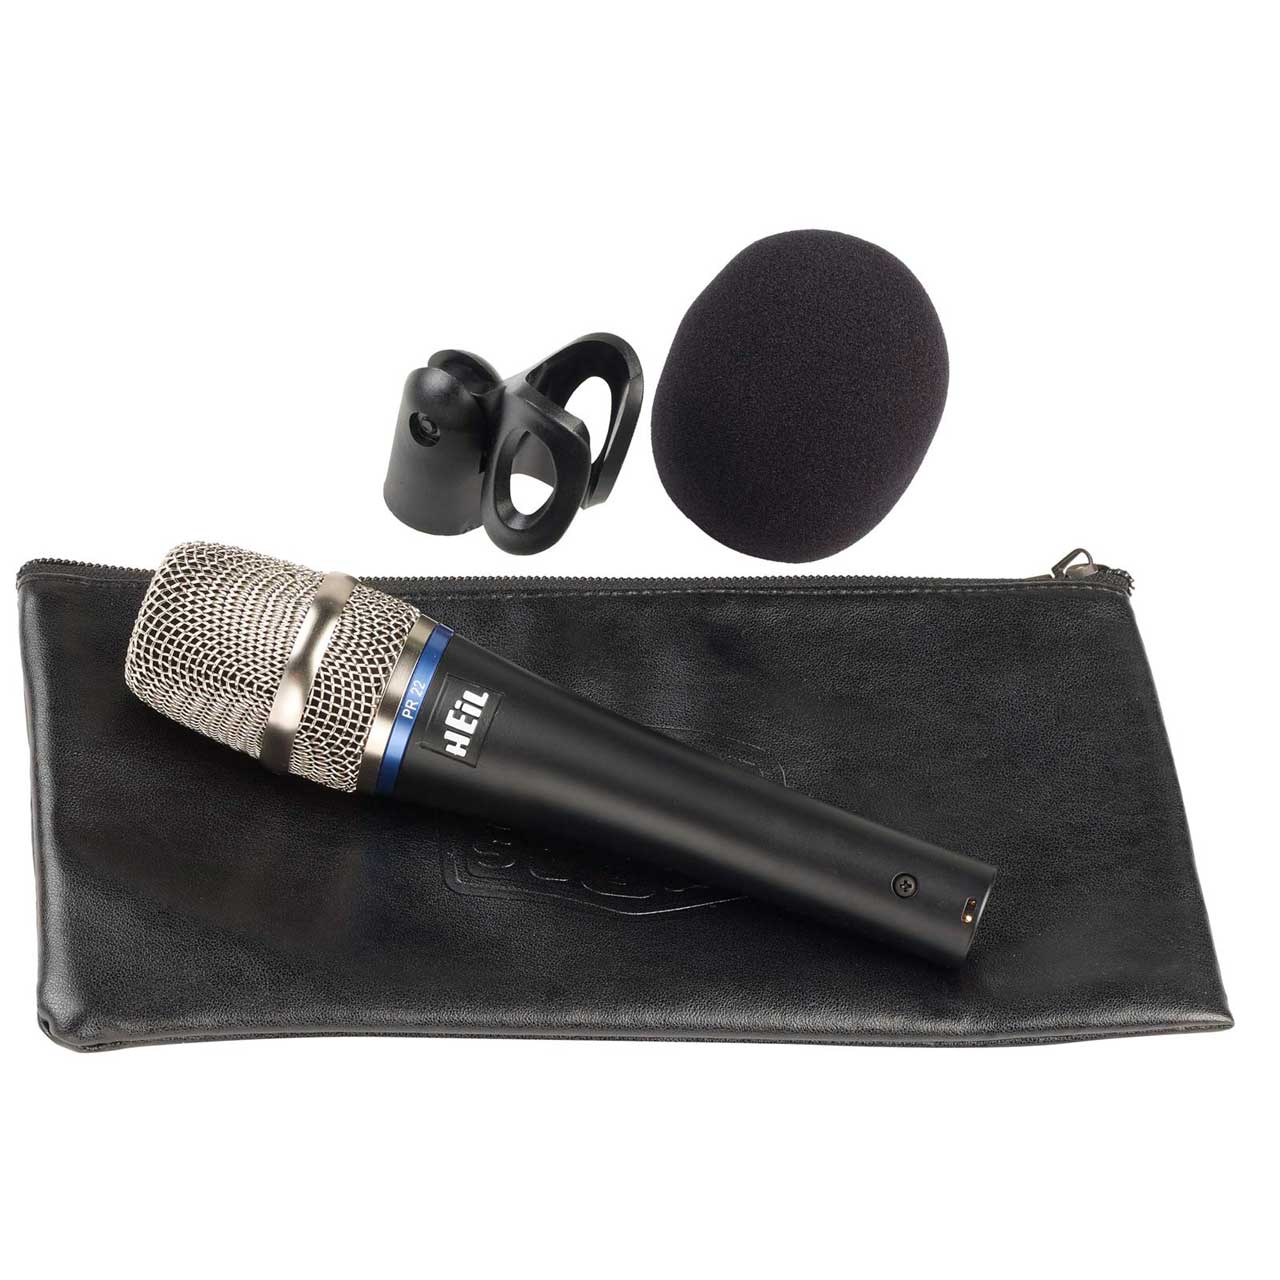 Heil PR22-SUT Dynamic Handheld Microphone with On-Off Switch